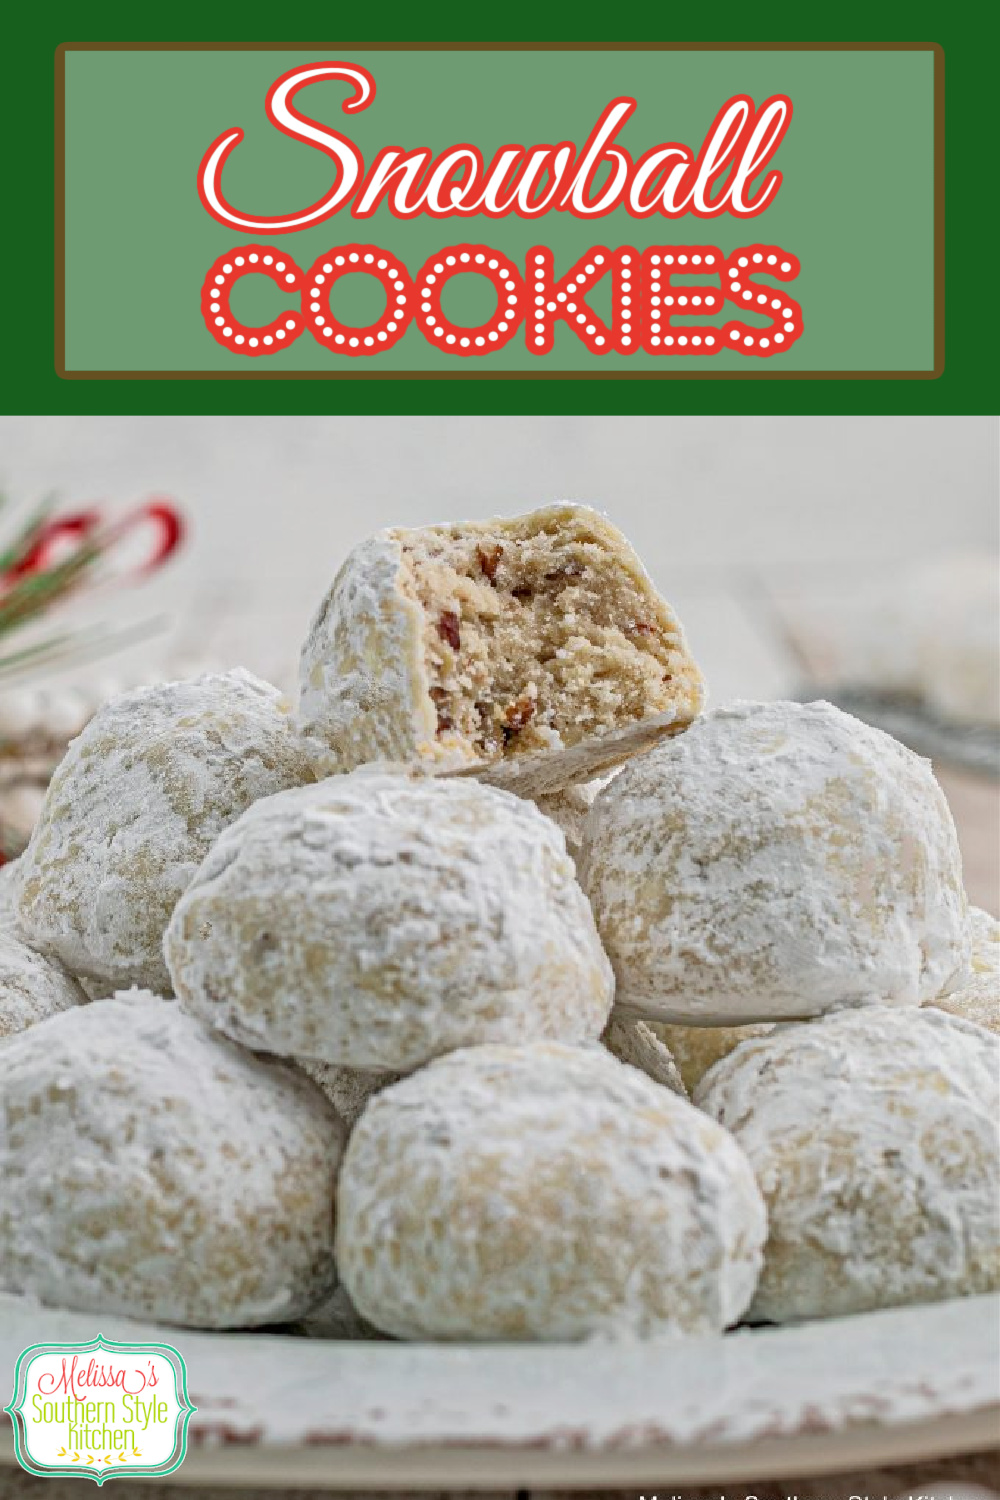 These holiday Snowball Cookies are rolled in a copious amount of powdered sugar, transforming them into a buttery bite of sugar cookie heaven #snowballs #snowballcookies #russianteacakes #mexicanweddingcookies #pecancookies #pecans #christmascookies #cookierecipes #bestsnowballcookies